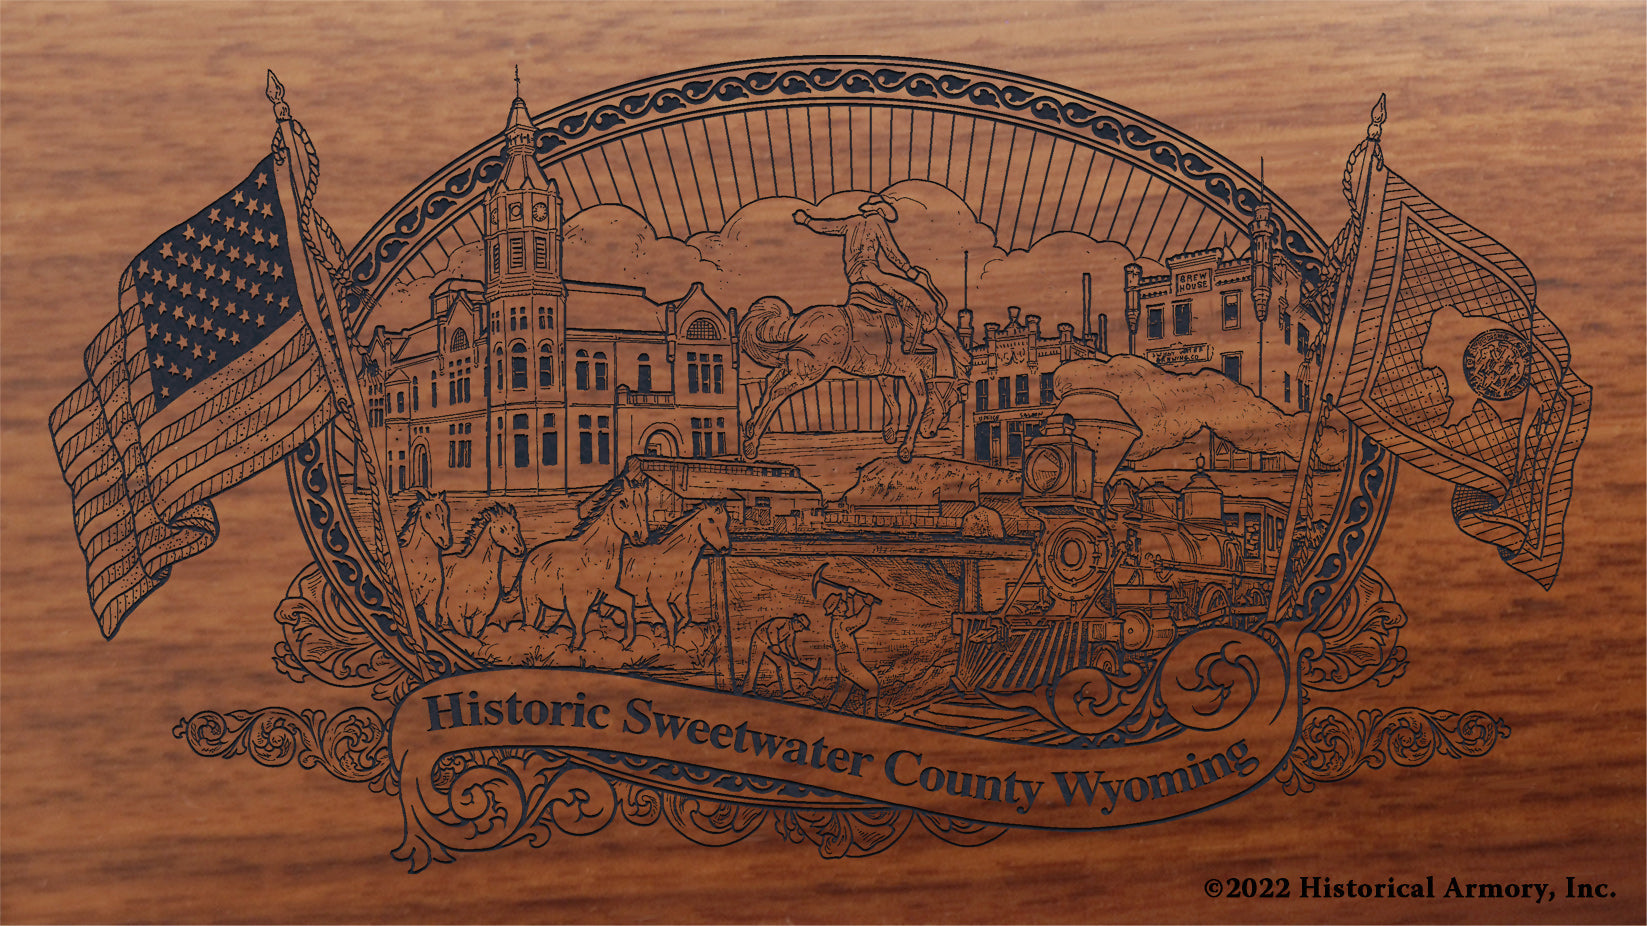 Sweetwater County Wyoming Engraved Rifle Buttstock